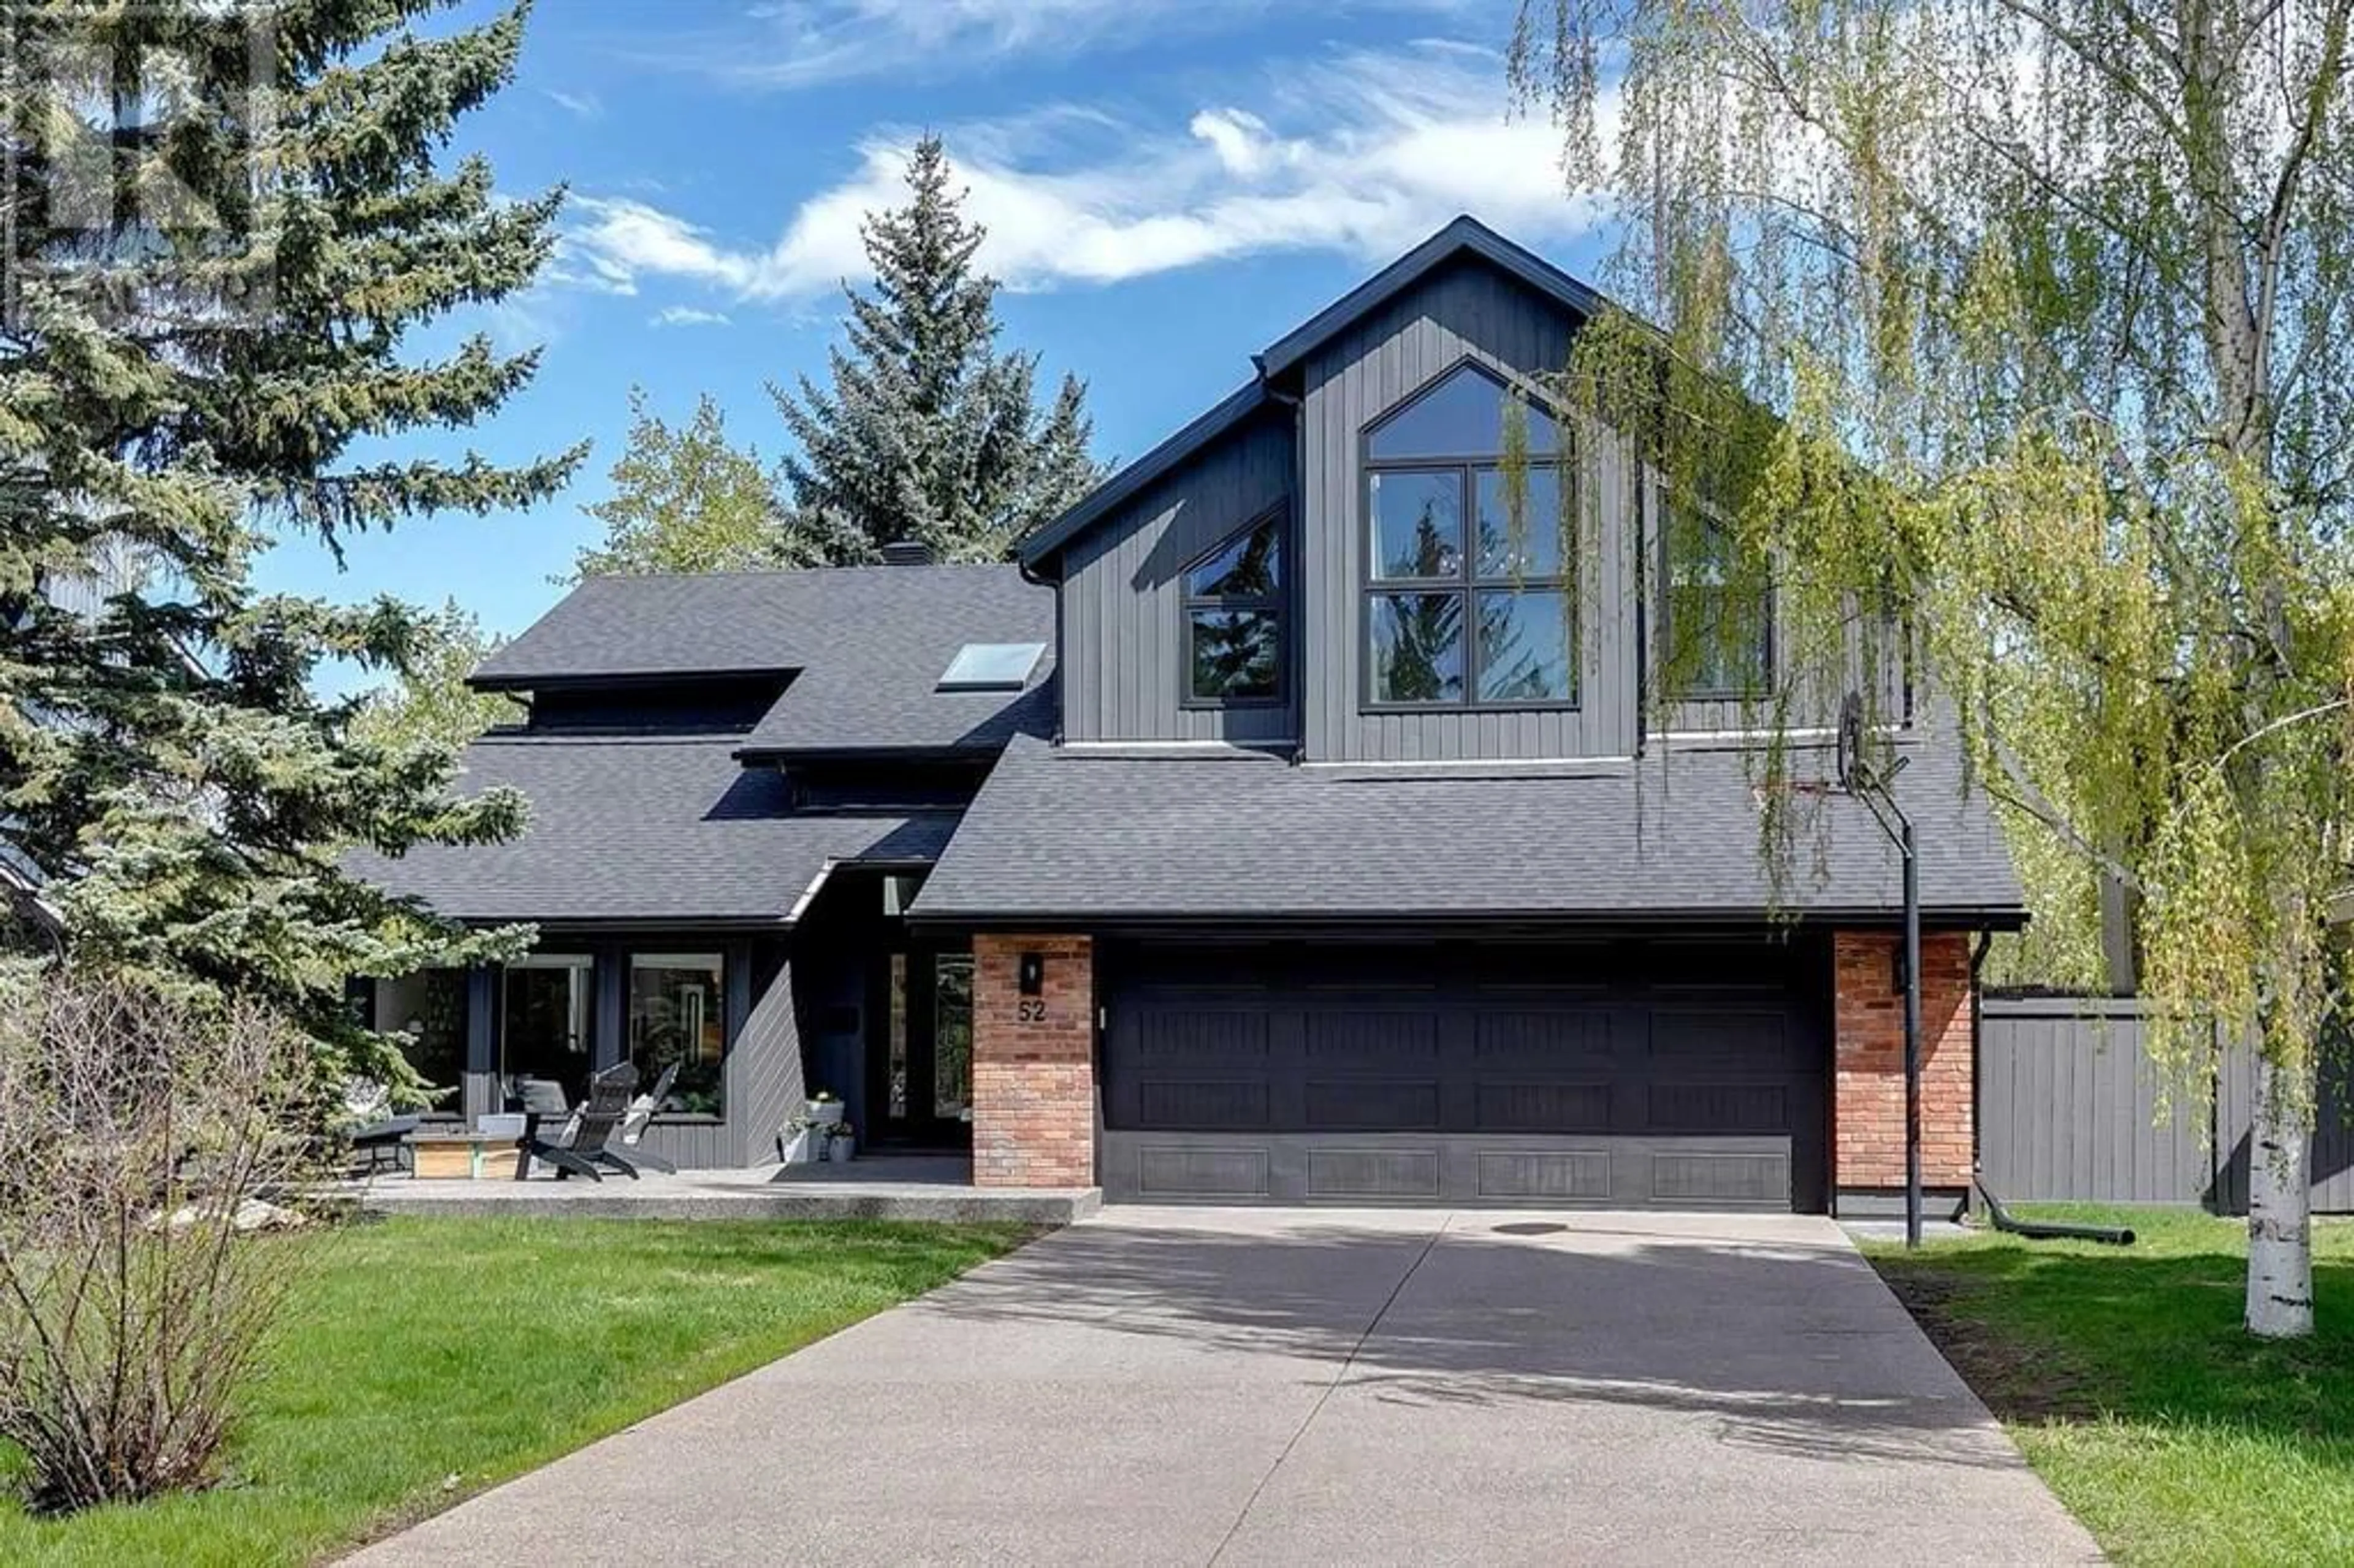 Home with brick exterior material for 52 Bow Village Crescent NW, Calgary Alberta T3B4X2